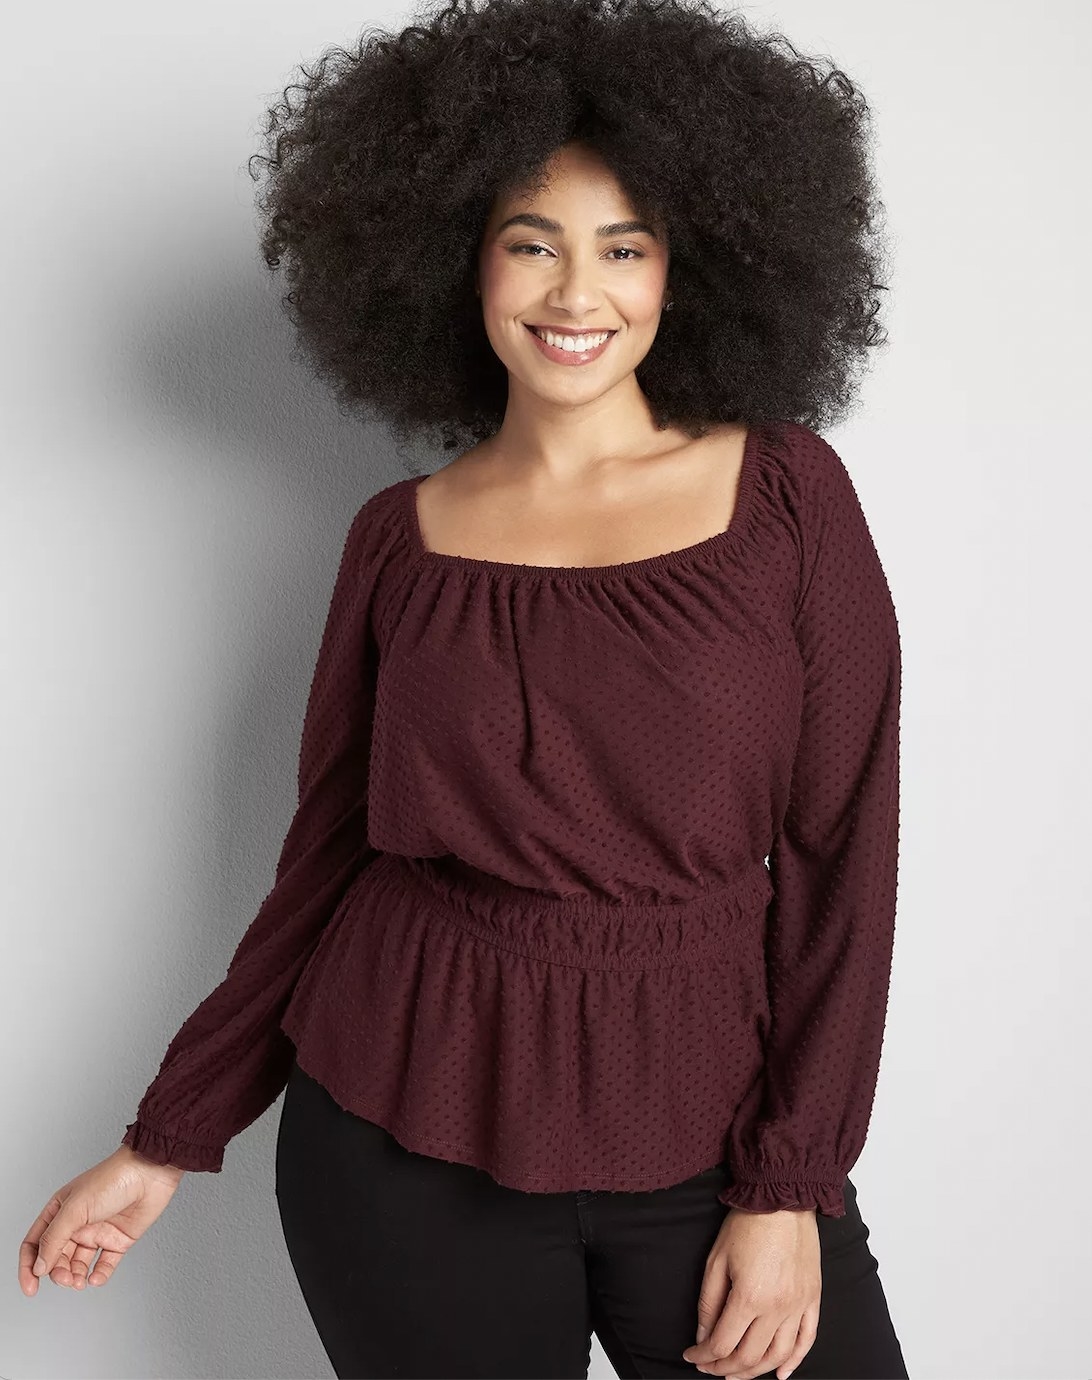 A person wearing a burgundy square-neck top